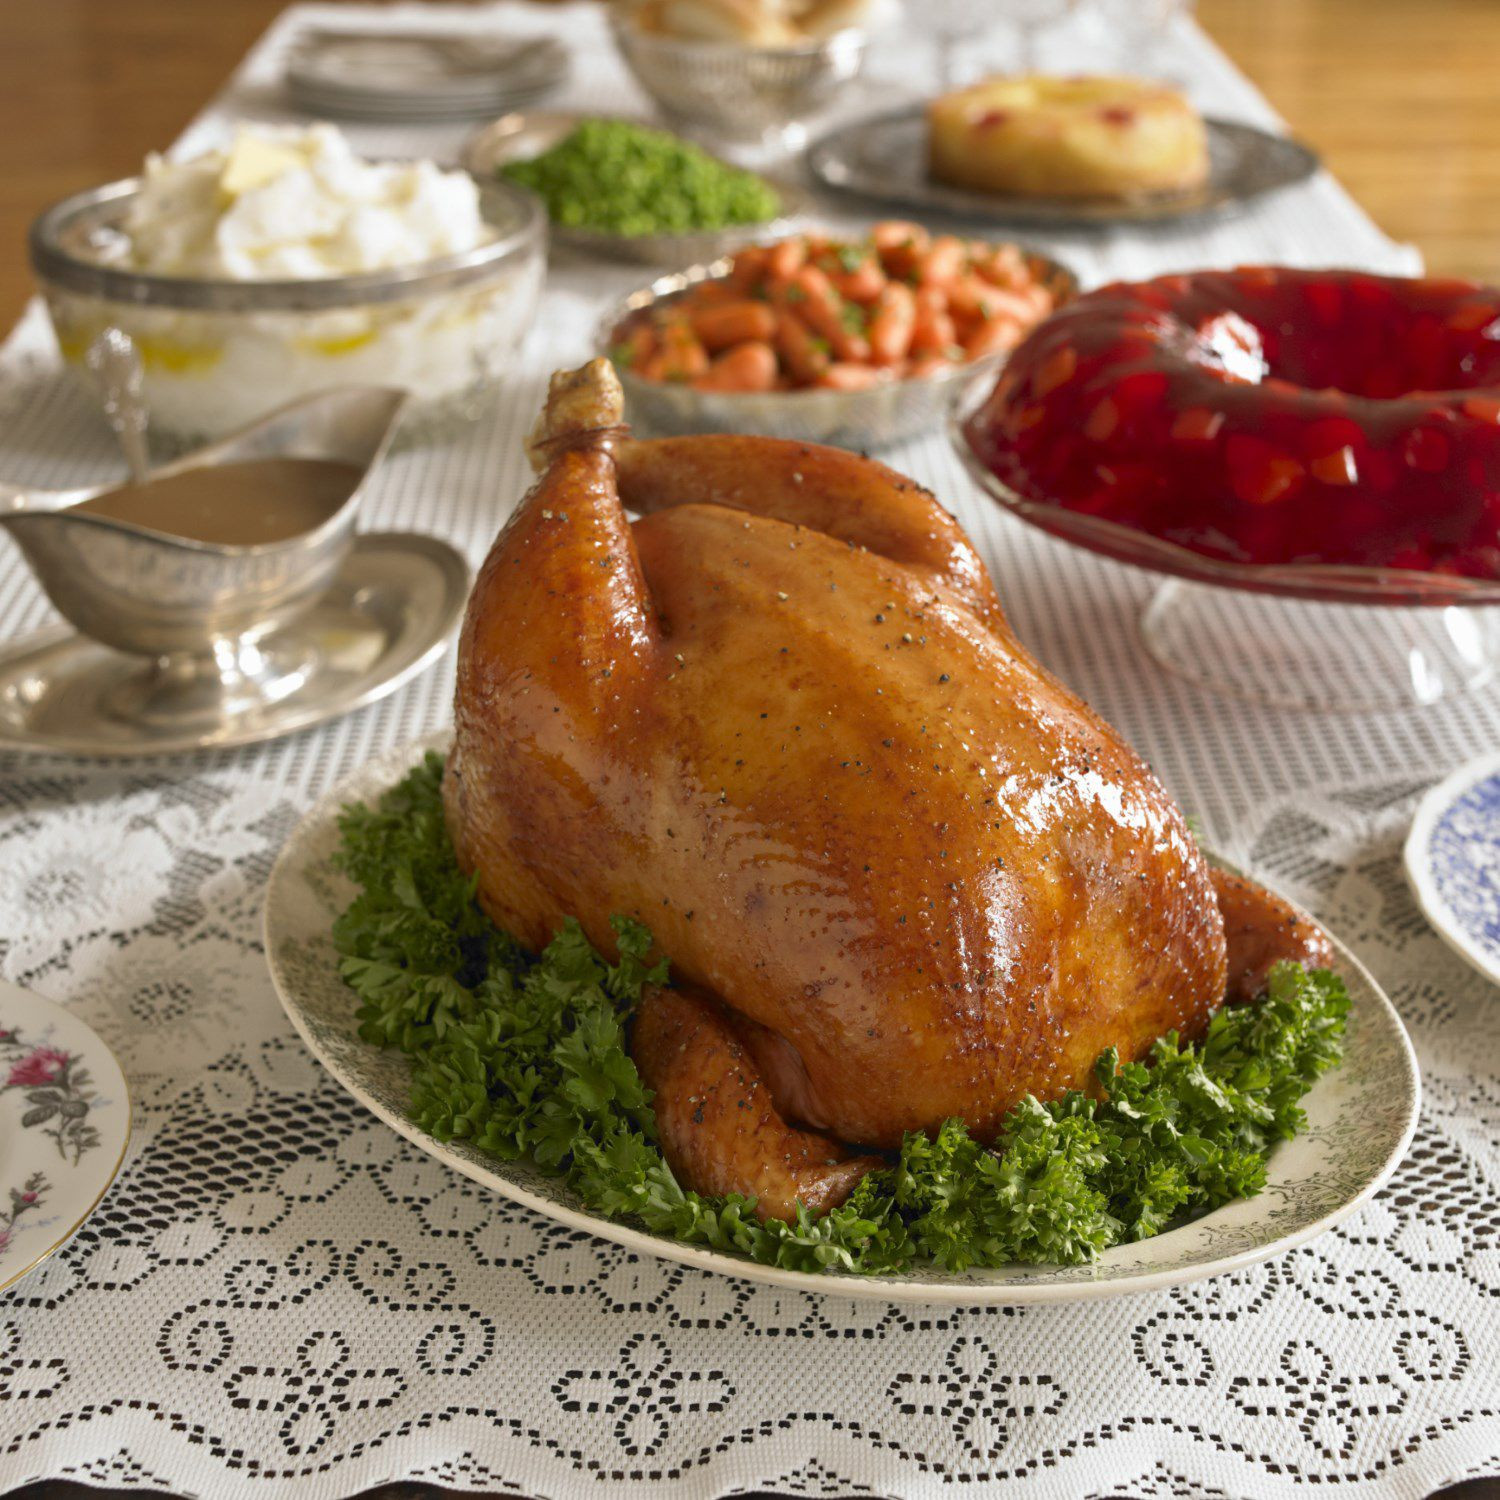 Prepared Thanksgiving Dinners
 Get Prepared Thanksgiving Day Dinners in Reno Nevada